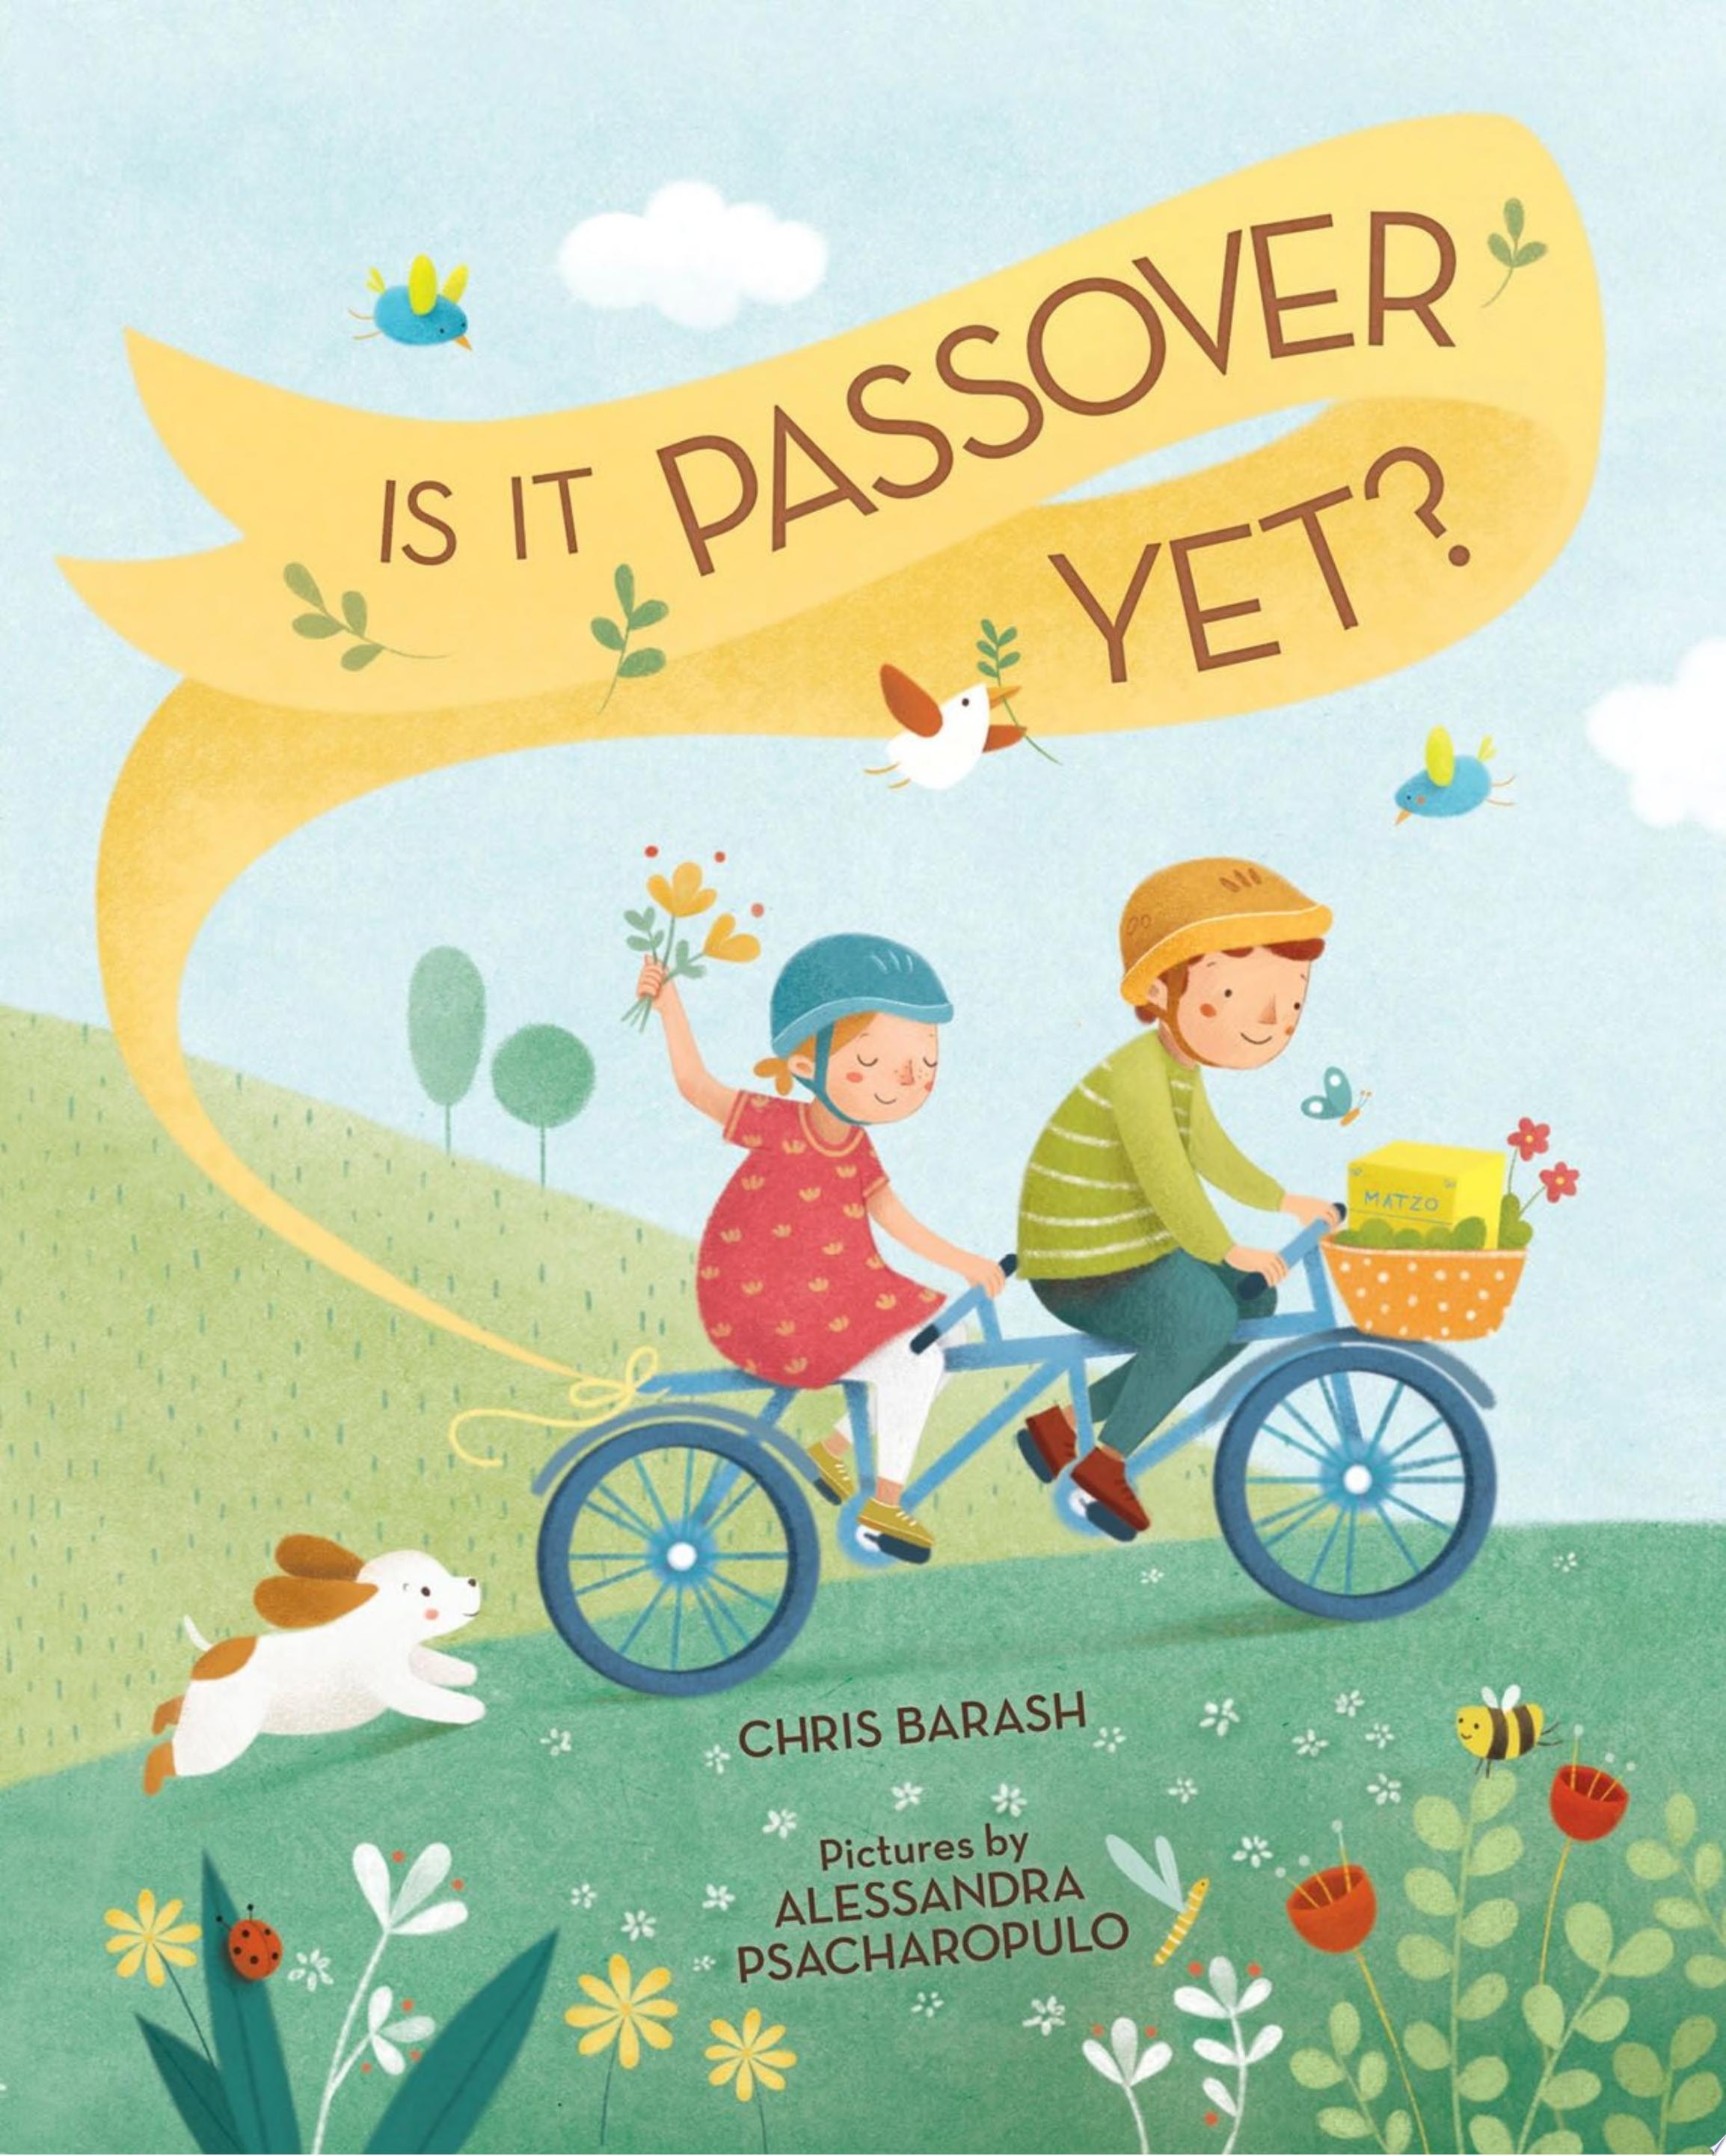 Image for "Is It Passover Yet?"